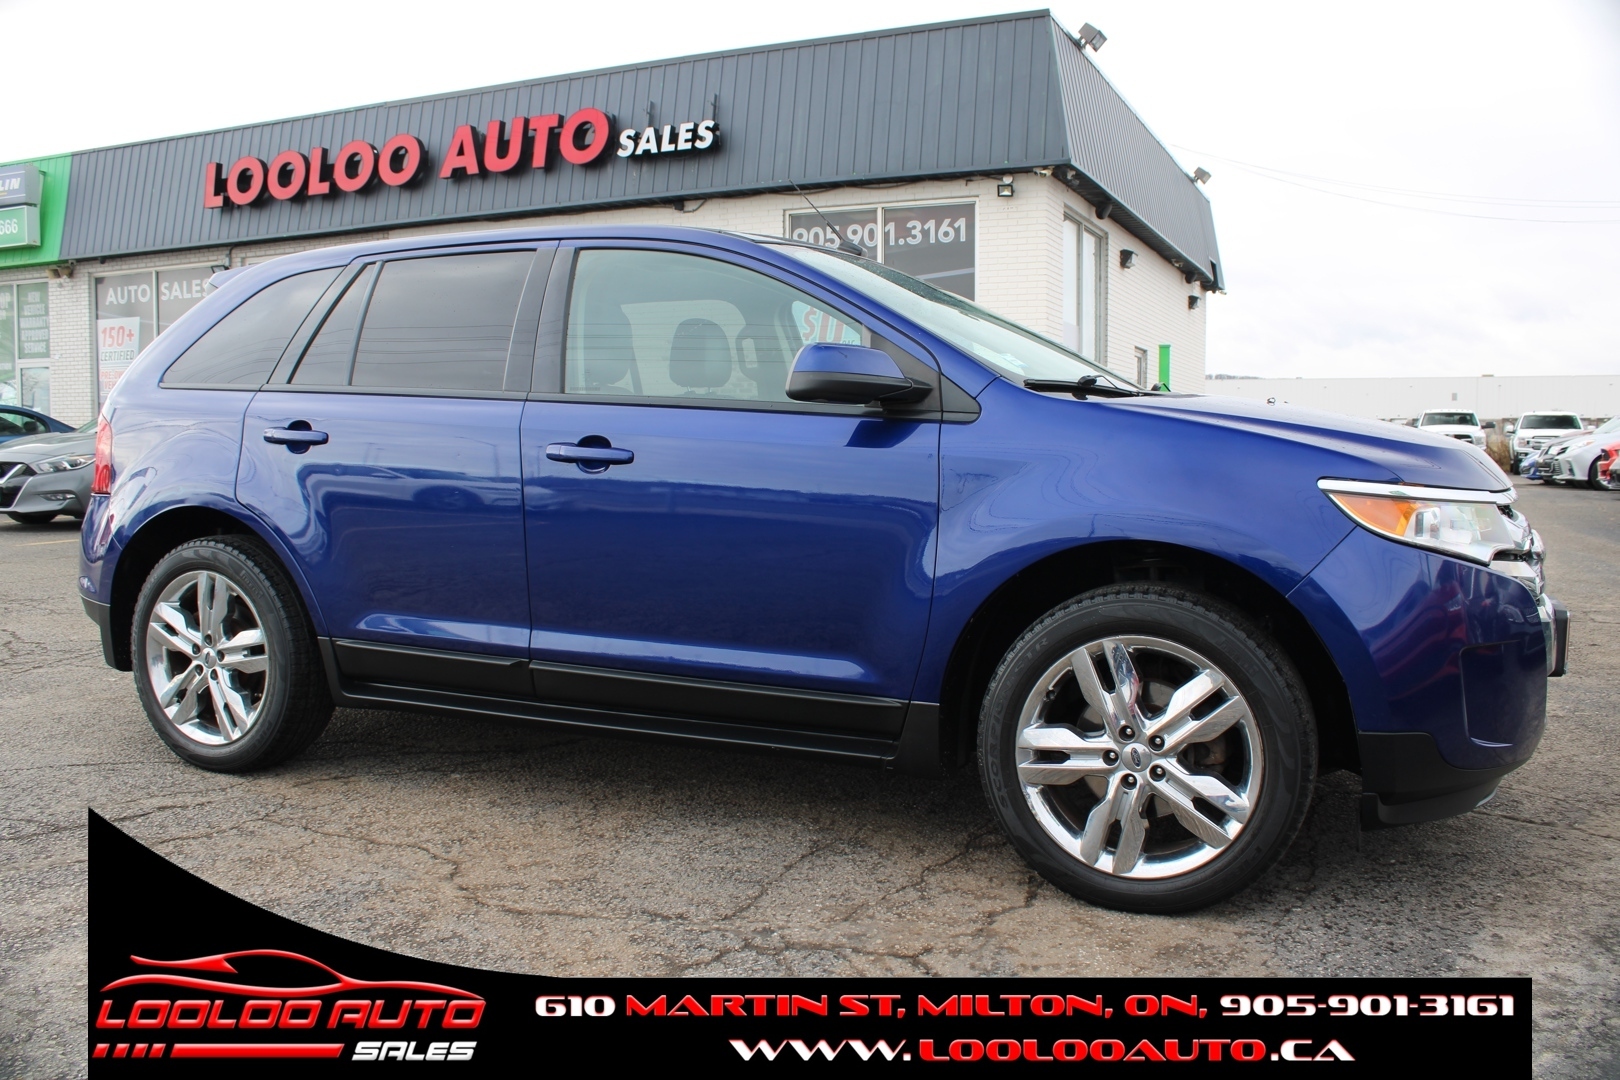 2014 Ford Edge SEL Navigation Leather Panoramic Sunroof $121/Week